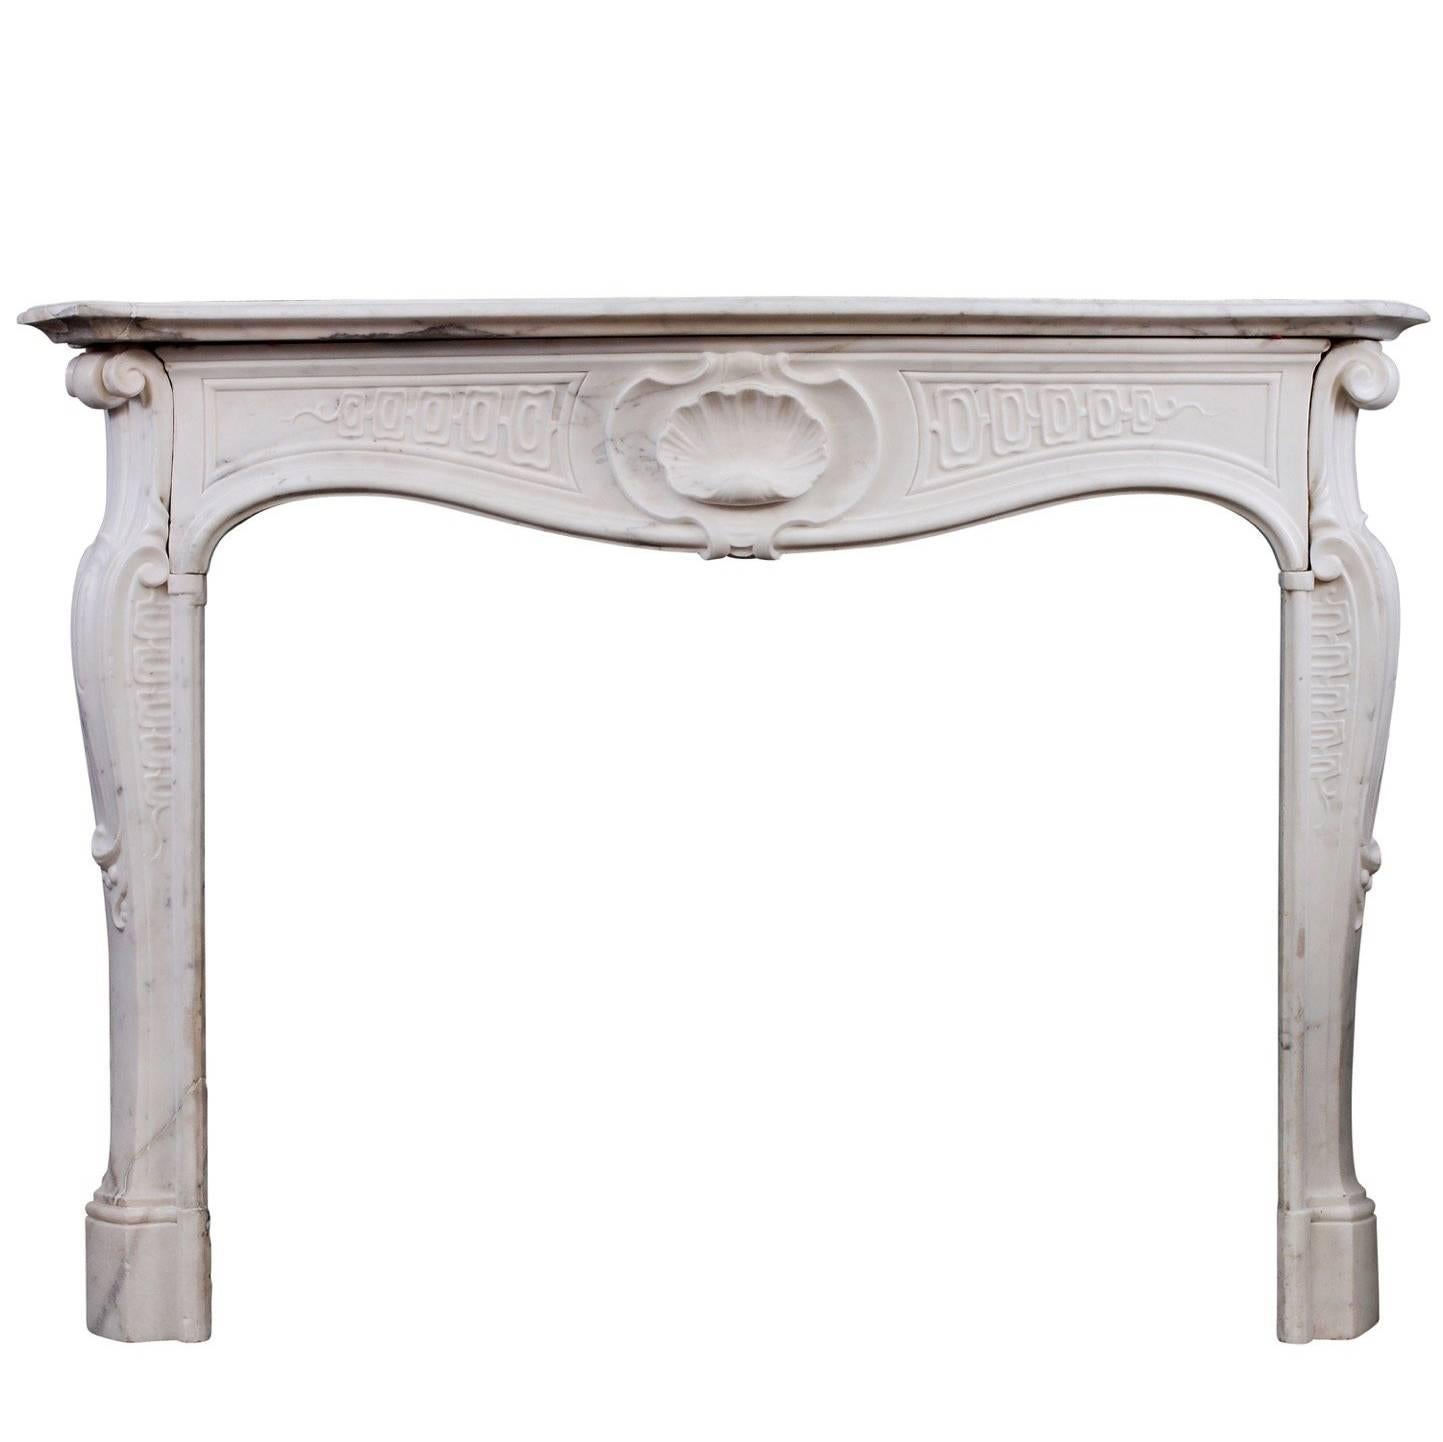 Quality 18th Century Antique Italian Fireplace in Statuary Marble For Sale